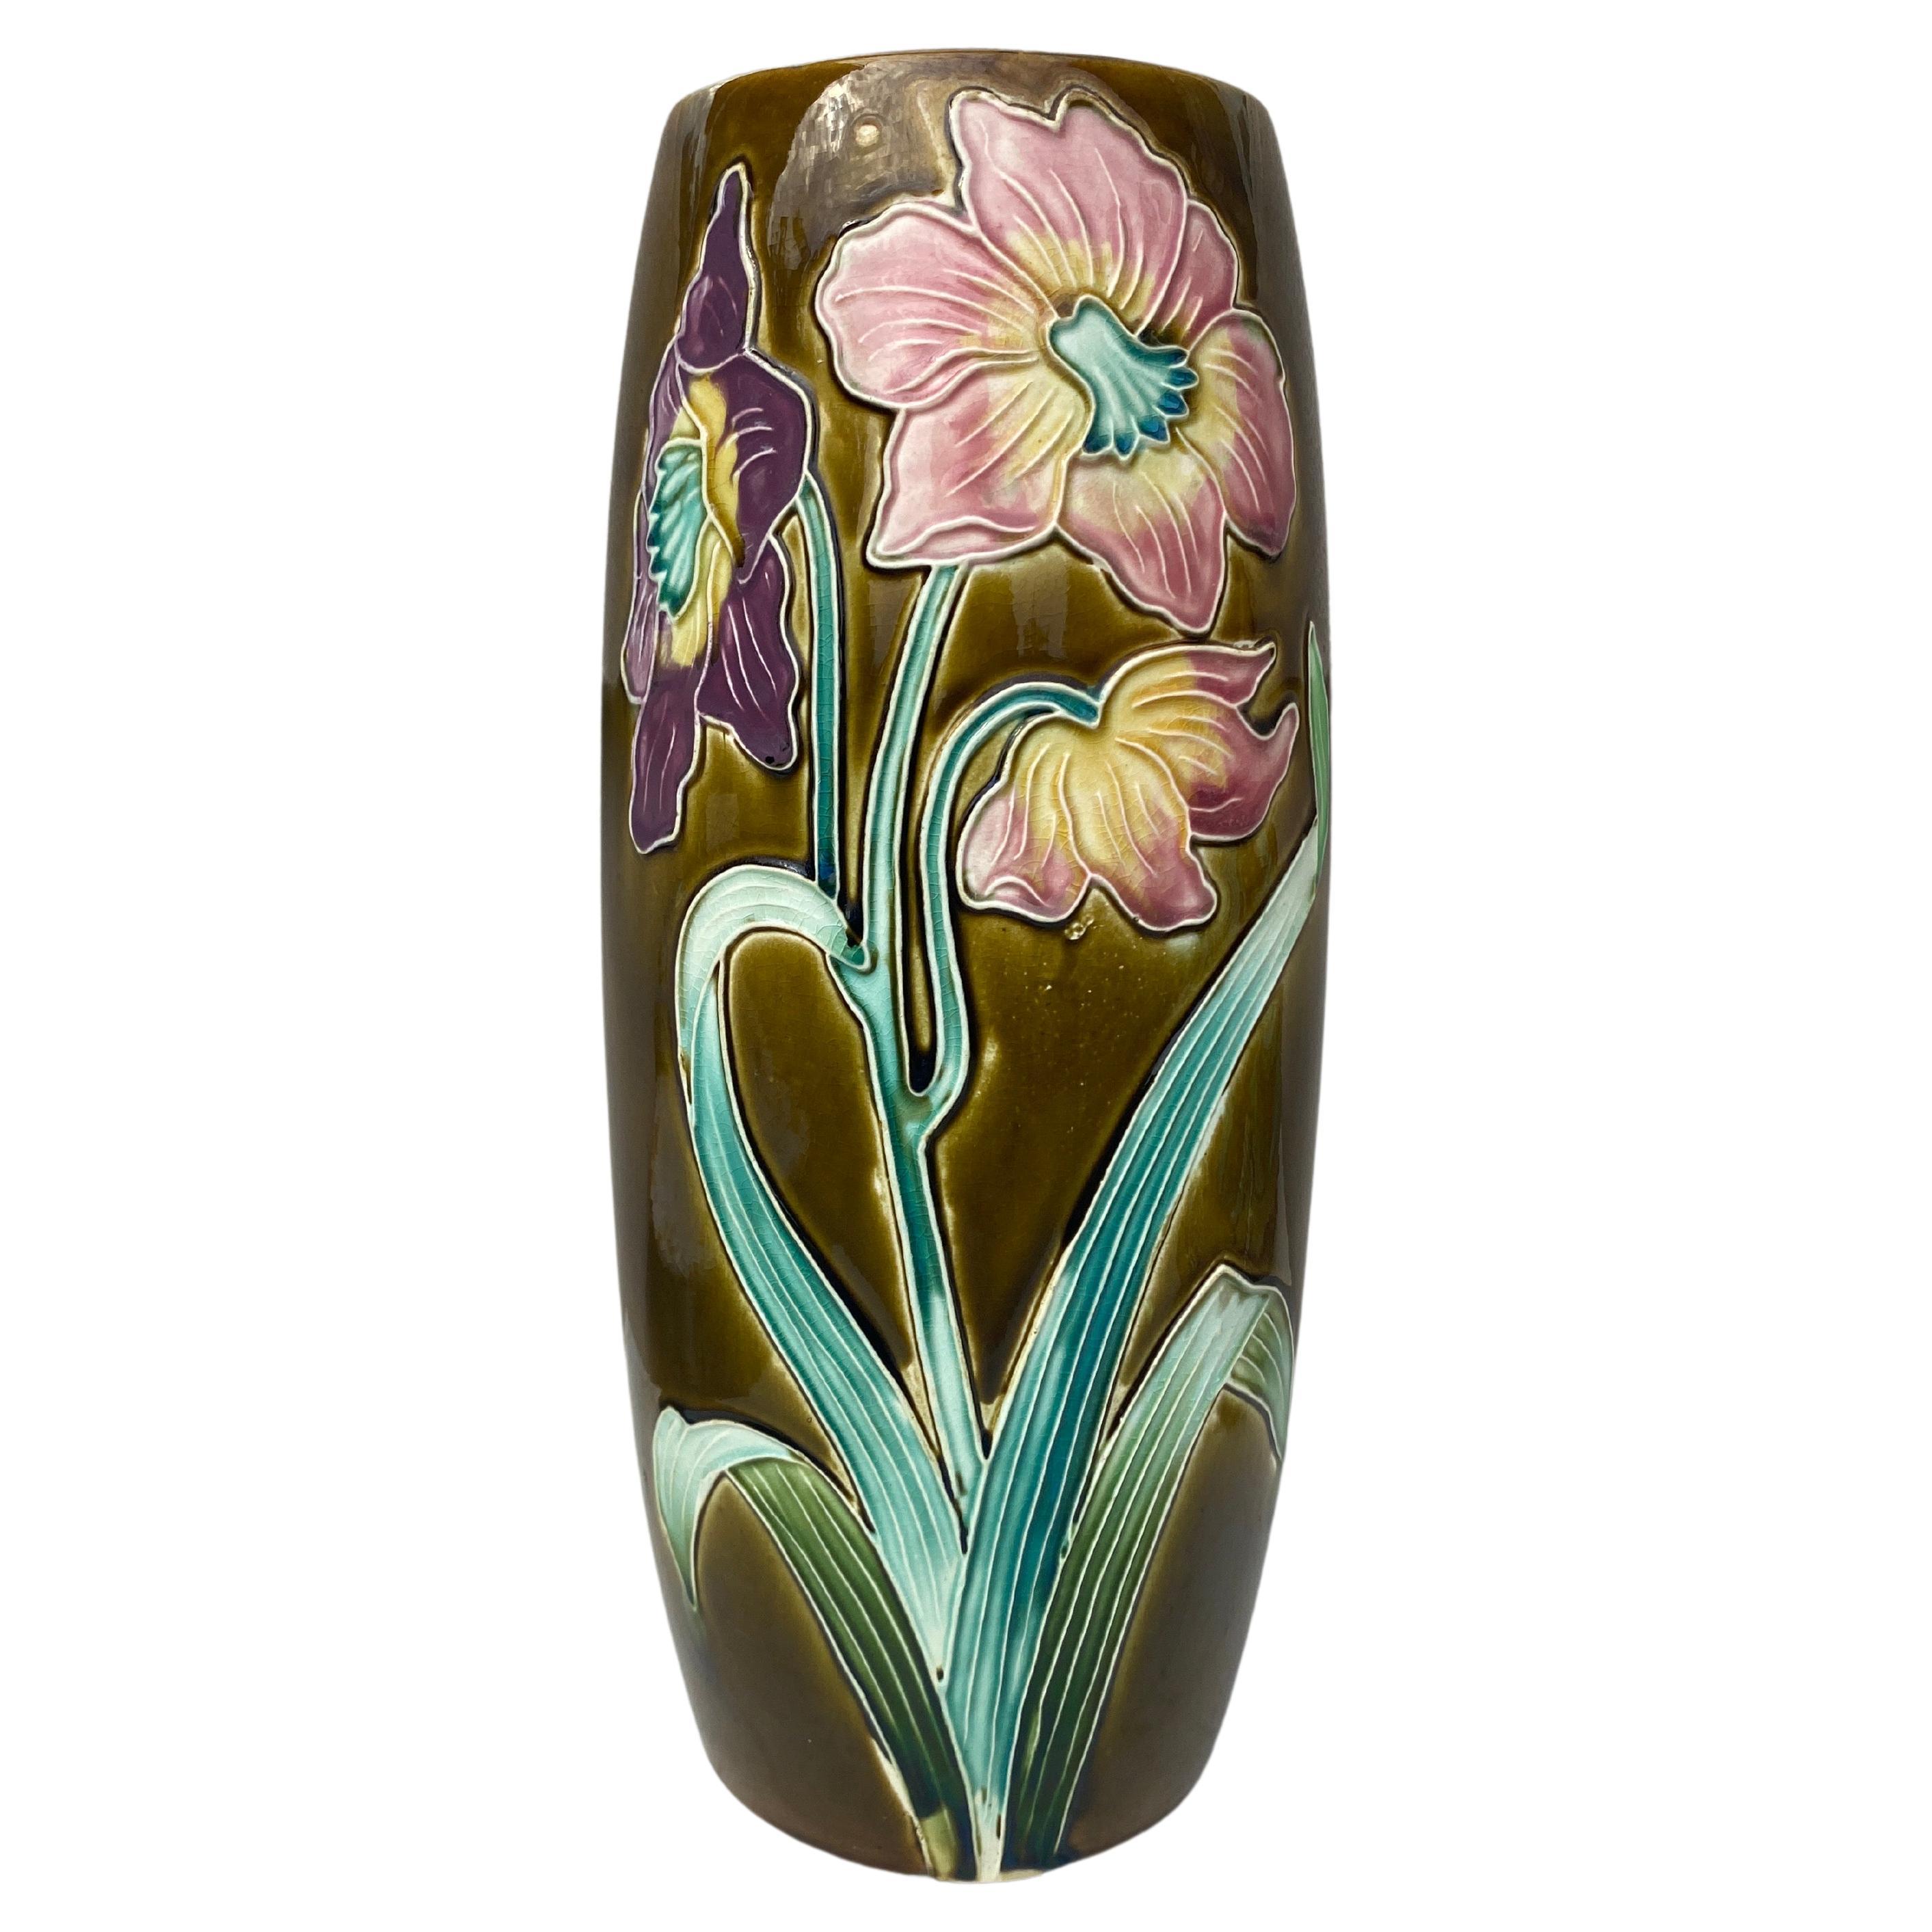 Large French Majolica flowers vase signed Fives Lille, circa 1880.
